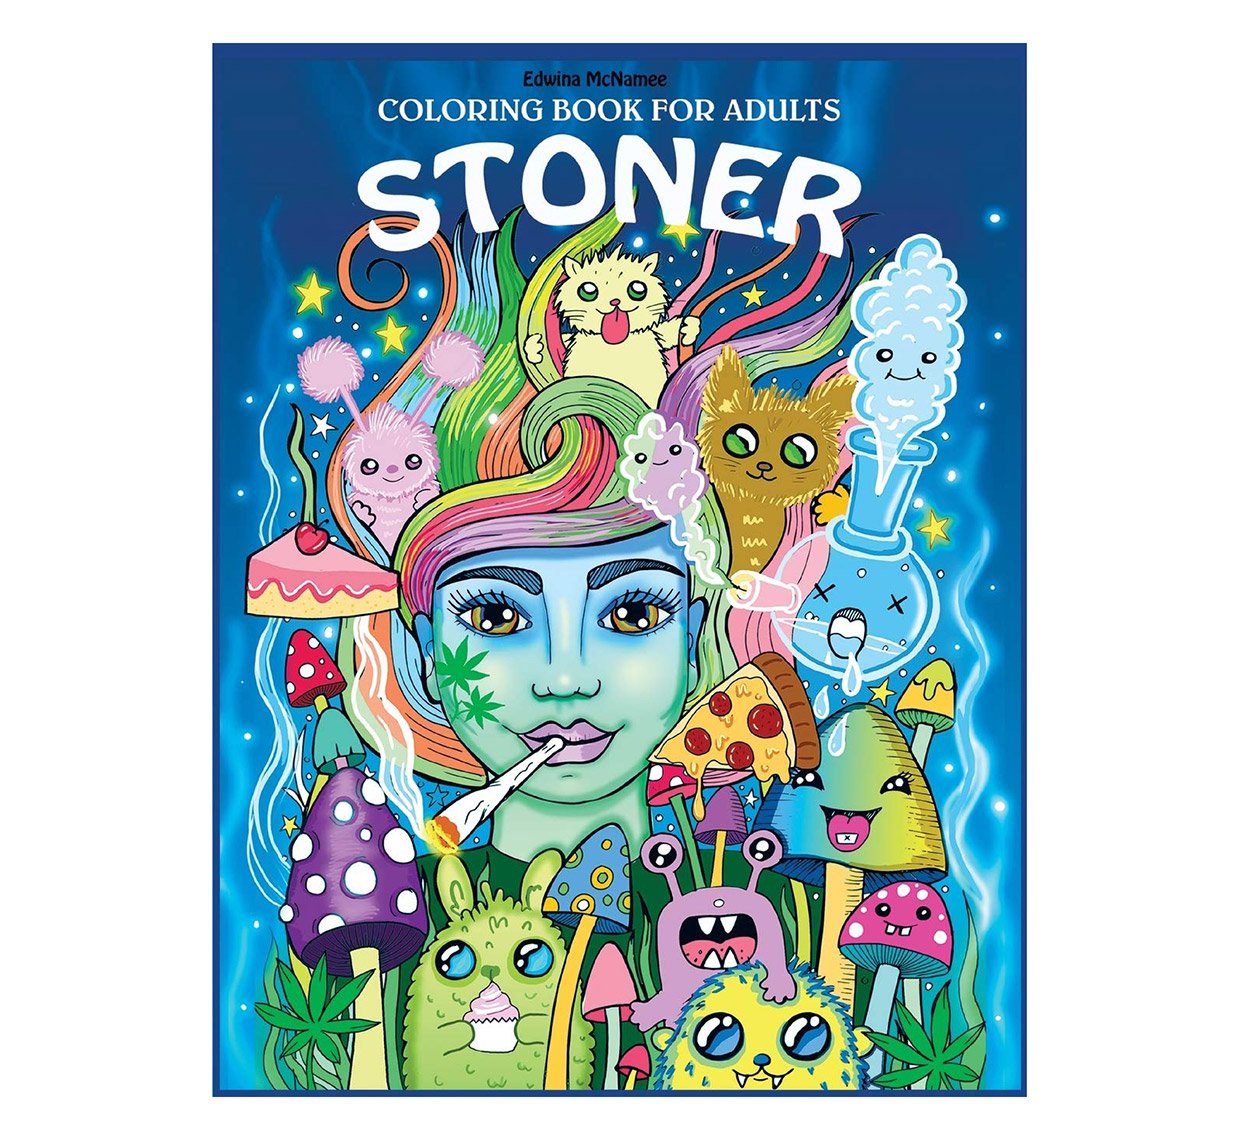 The Stoner’s Coloring Book